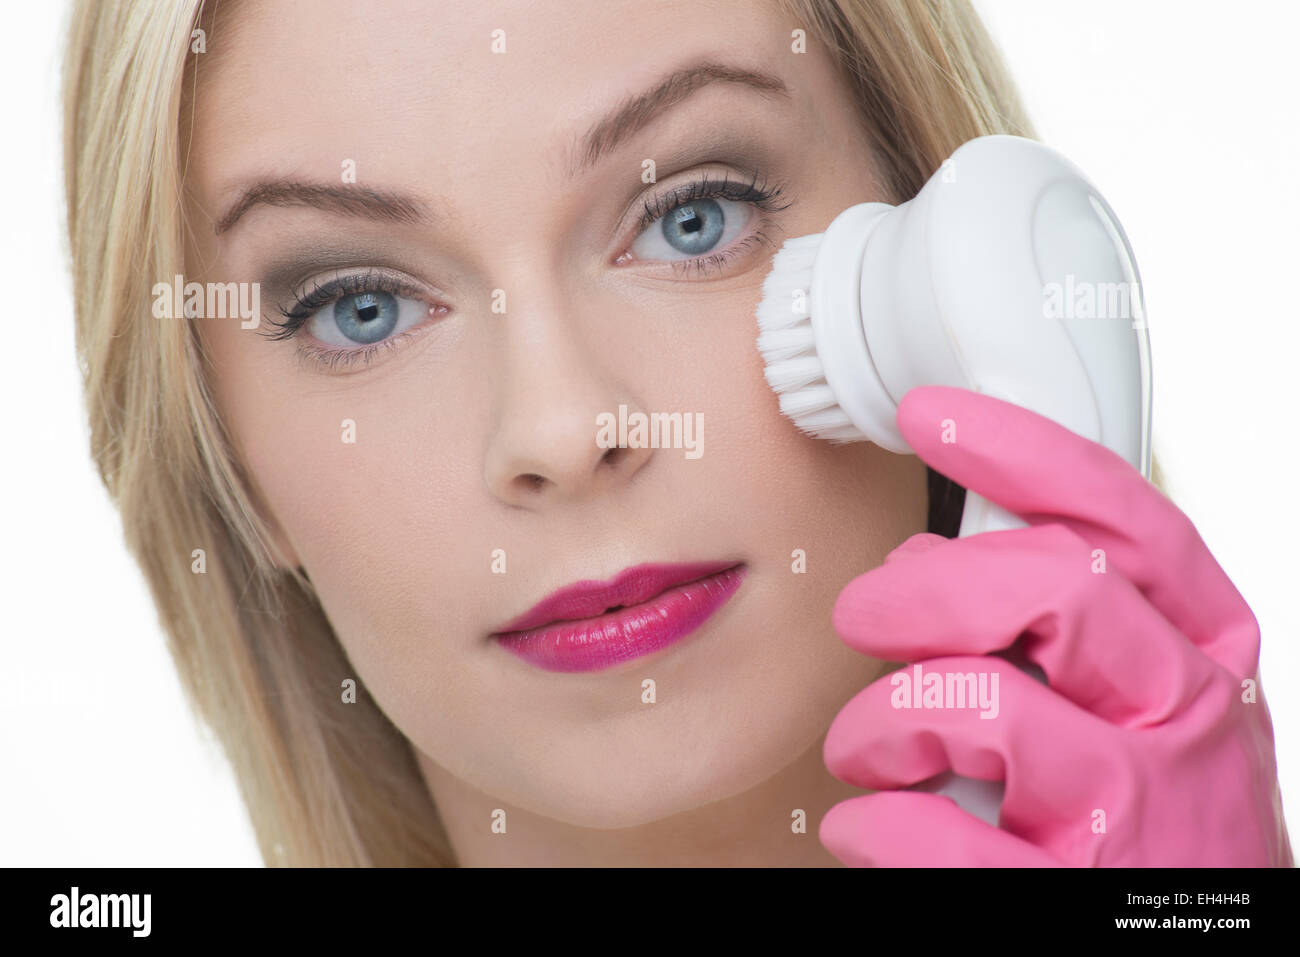 woman cleansing her face using a deep cleansing brush Stock Photo